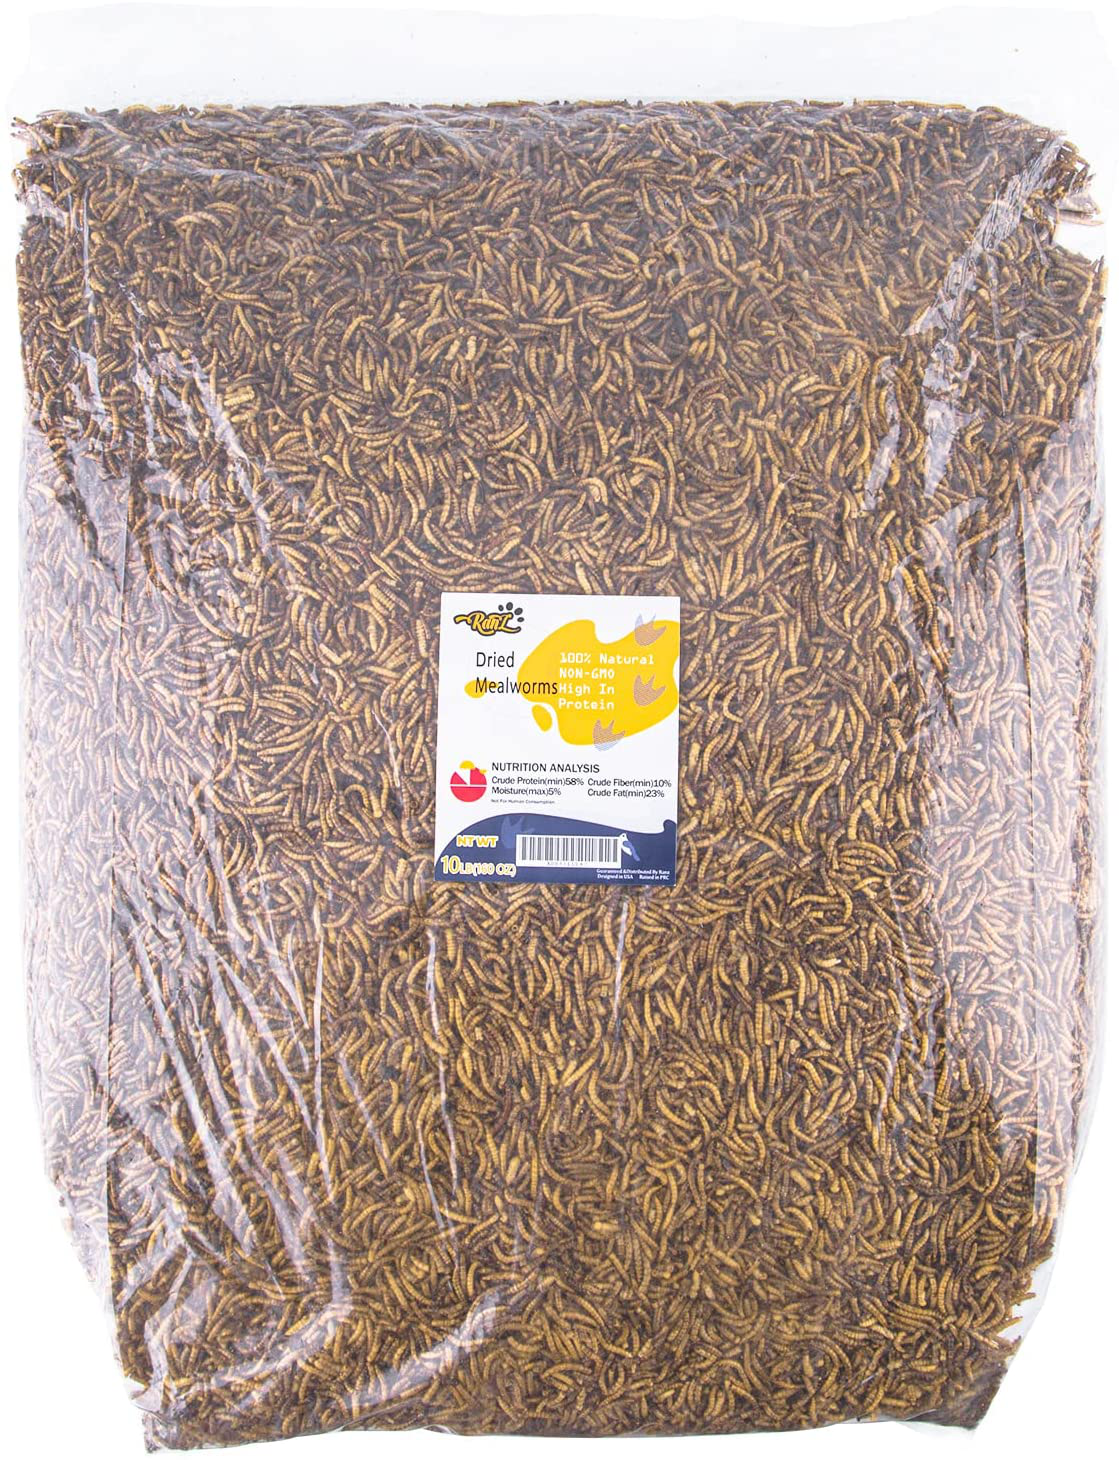 RANZ 5LB & 10LB Non-Gmo Dried Mealworms for Chicken Feed, High Protein Mealworm Treats, Best for Wild Birds, Ducks, Hens, Fish, Reptiles & Amphibian. Animals & Pet Supplies > Pet Supplies > Bird Supplies > Bird Treats RANZ 10 Pound (Pack of 1)  